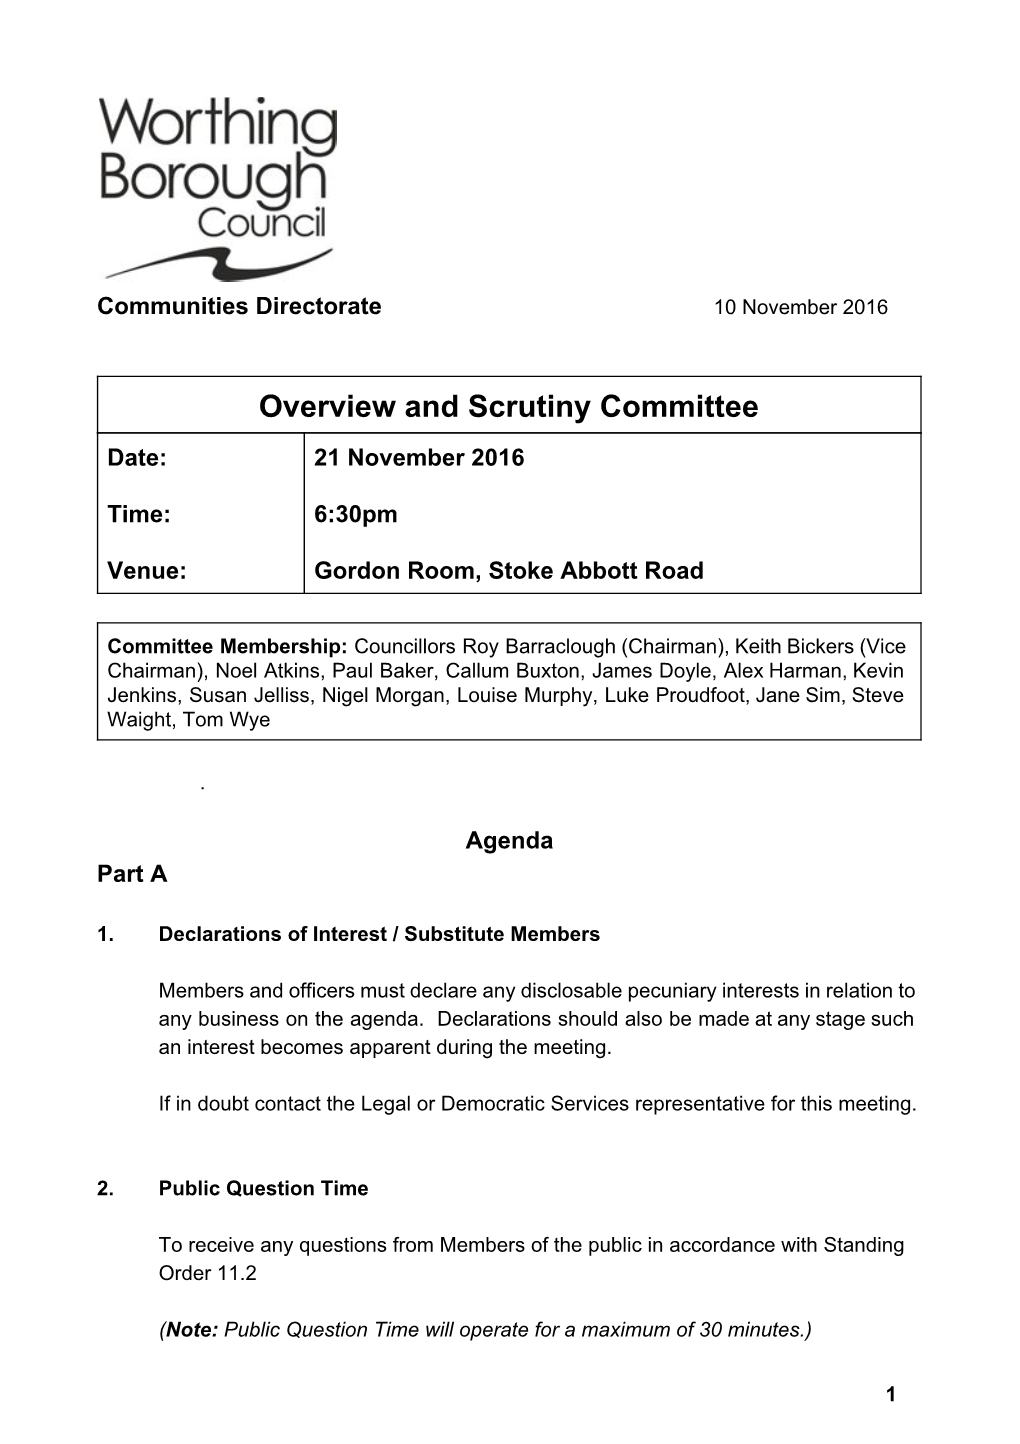 Overview and Scrutiny Committee Date: 21 November 2016